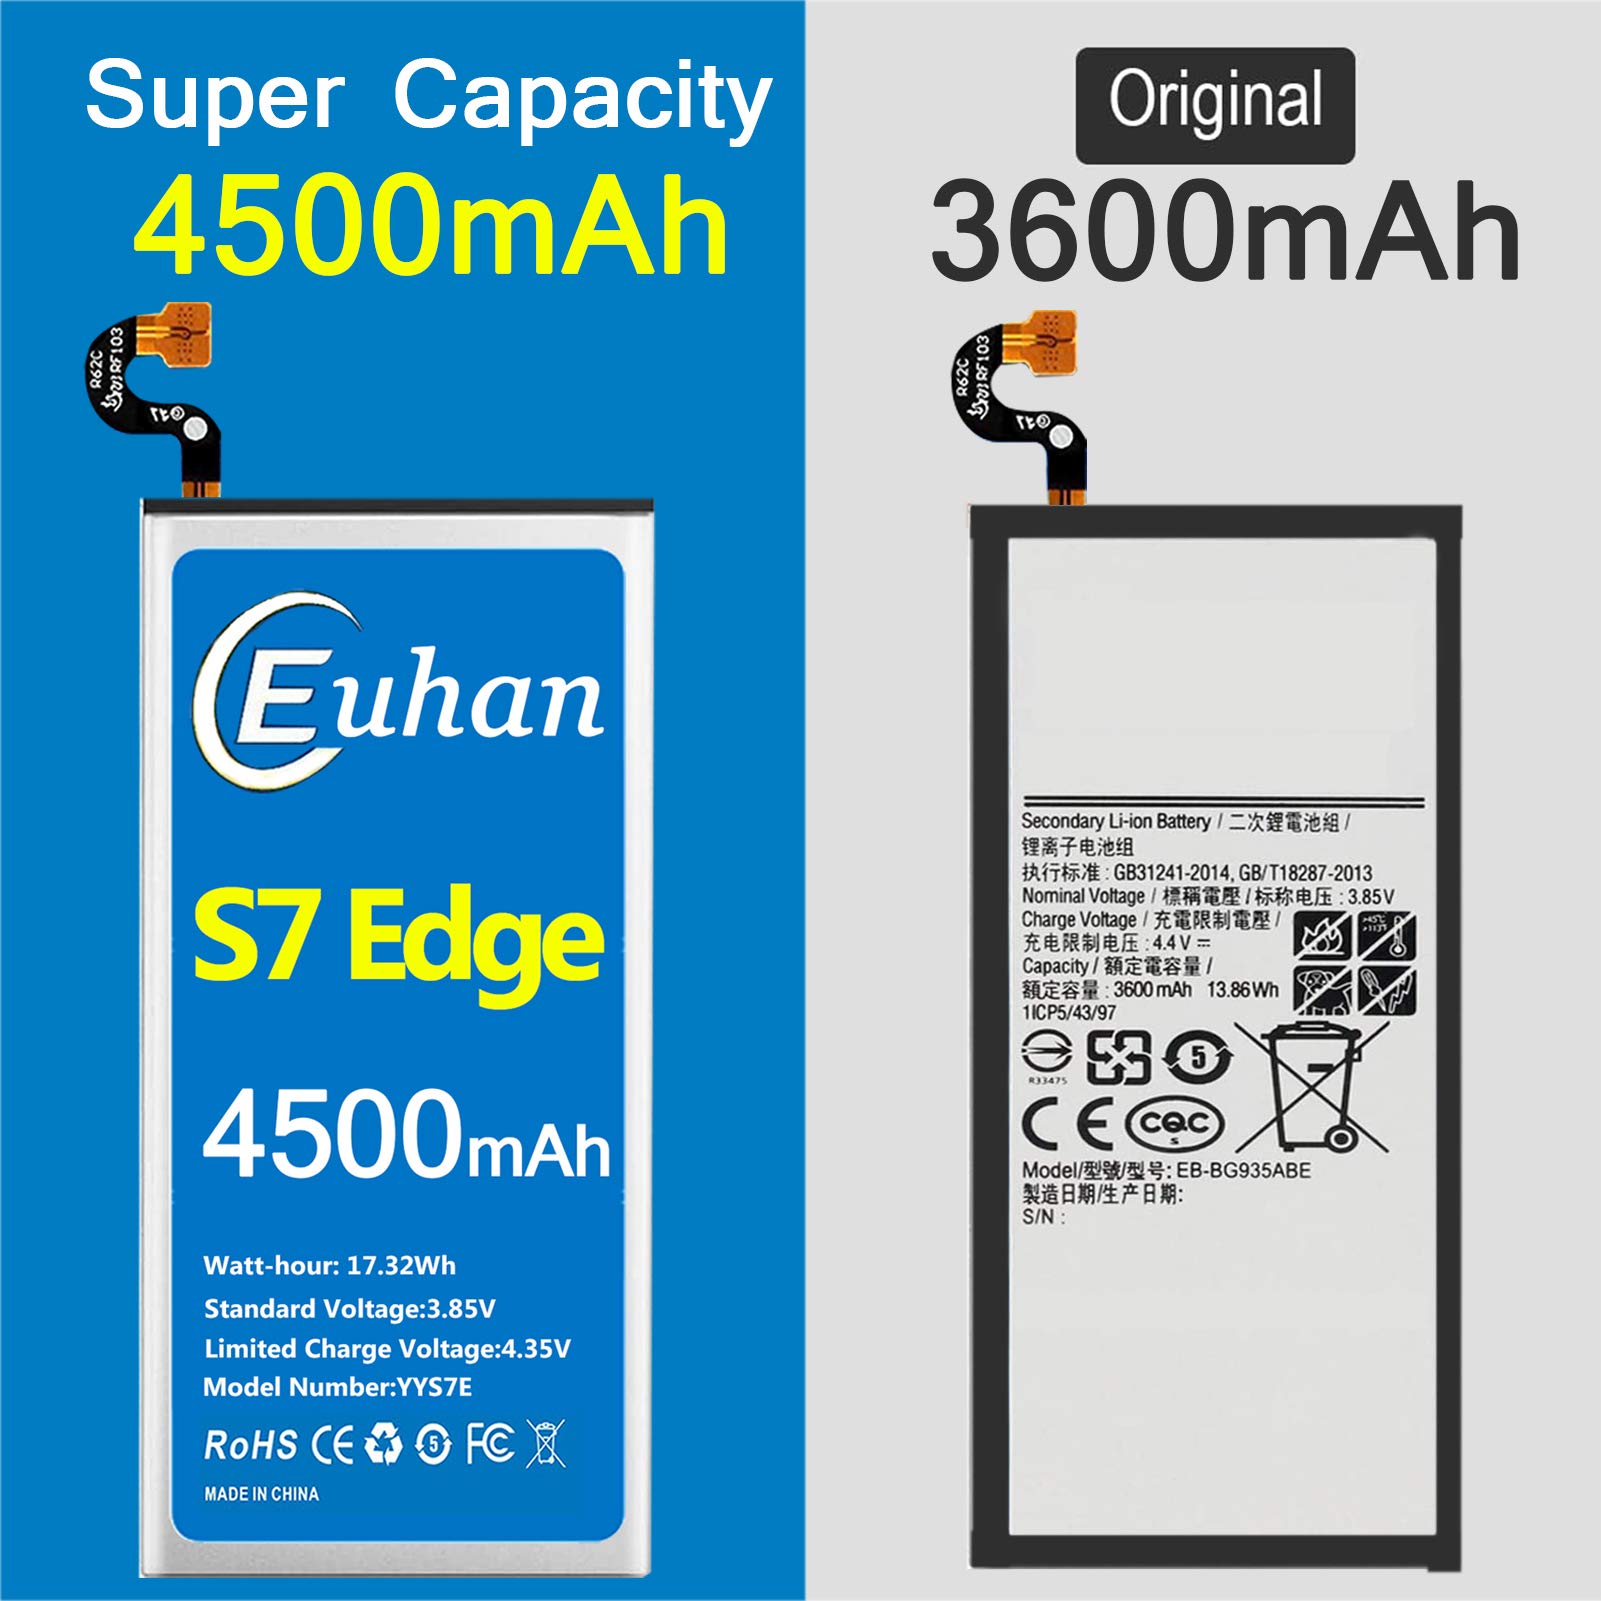 Galaxy S7 Edge Battery, [Upgraded] Euhan 4500mAh Li-Polymer EB-BG935ABE Replacement Battery for Samsung Galaxy S7 Edge SM-G935 G935V, G935T,G935A,G935P with Repair Tools Kit [24 Month Service]